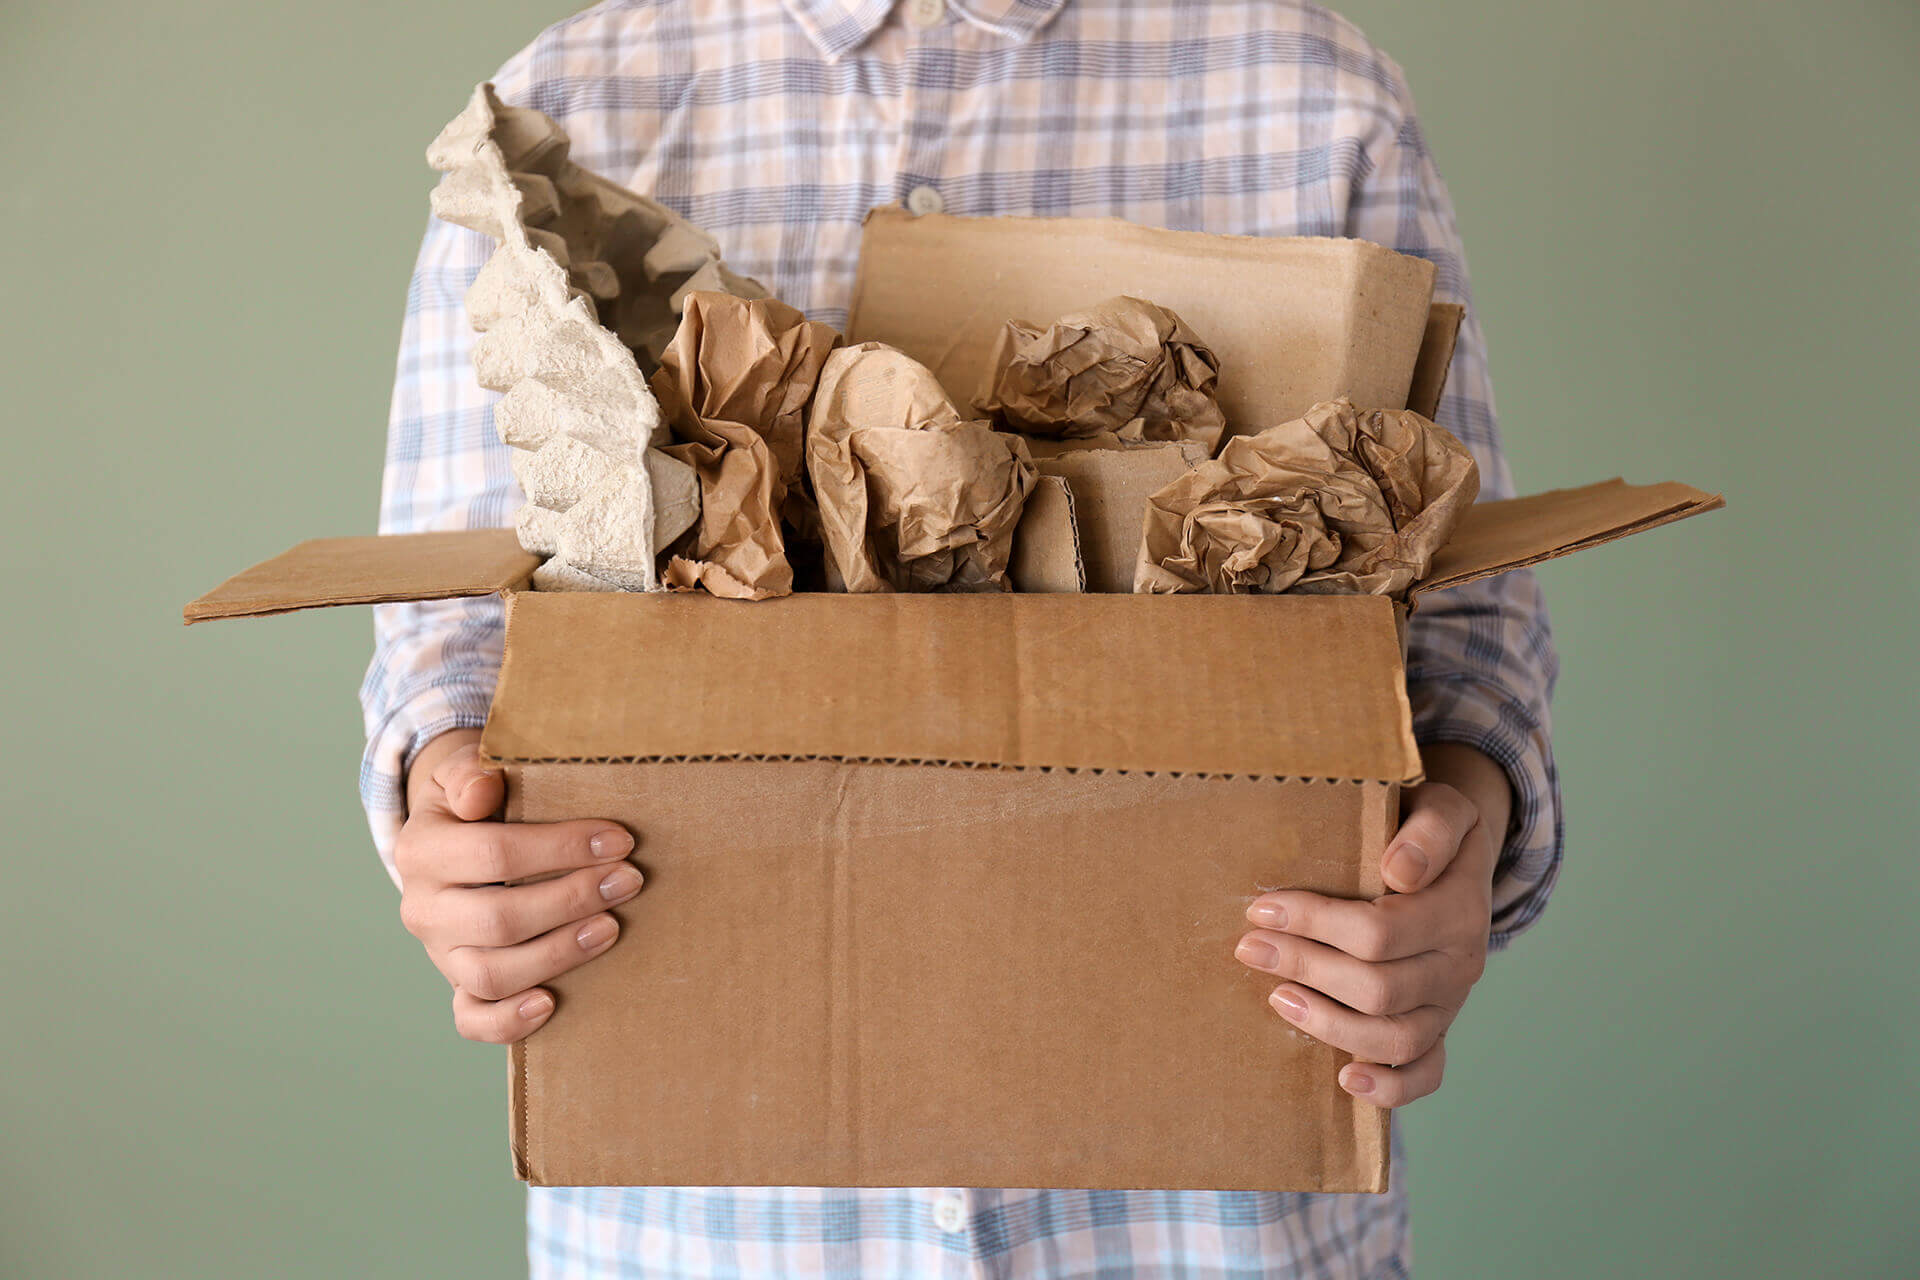 A man holding a box with materials